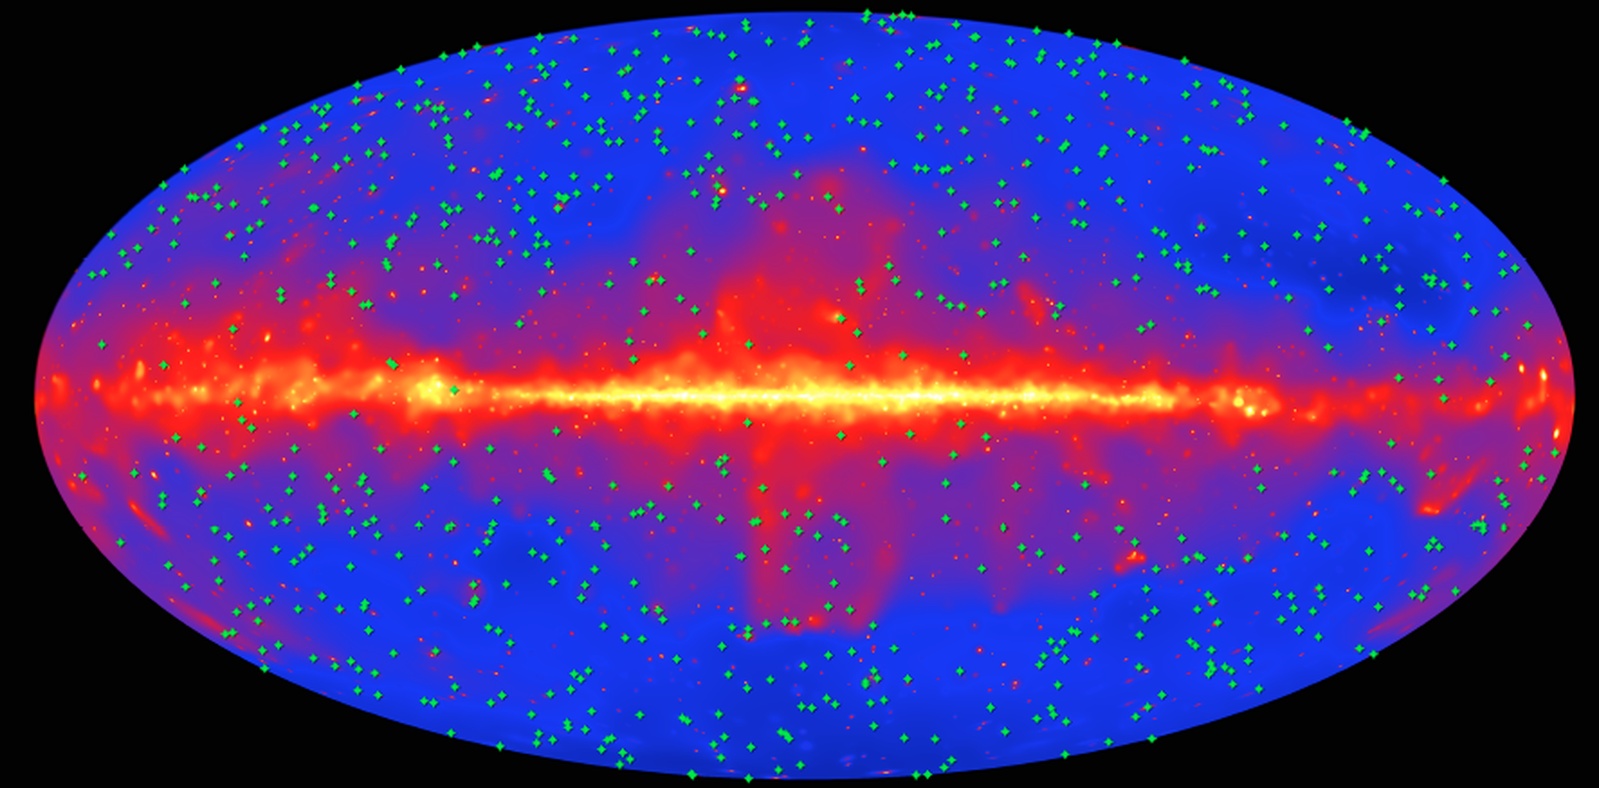 This map of the entire sky shows the location of 739 blazars used in the Fermi Gamma-ray Space Telescope’s measurement of the extragalactic background light (EBL). The background shows the sky as it appears in gamma rays with energies above 10 billion electron volts, constructed from nine years of observations by Fermi’s Large Area Telescope. The plane of our Milky Way galaxy runs along the middle of the plot. Credit: NASA/DOE/Fermi LAT Collaboration.